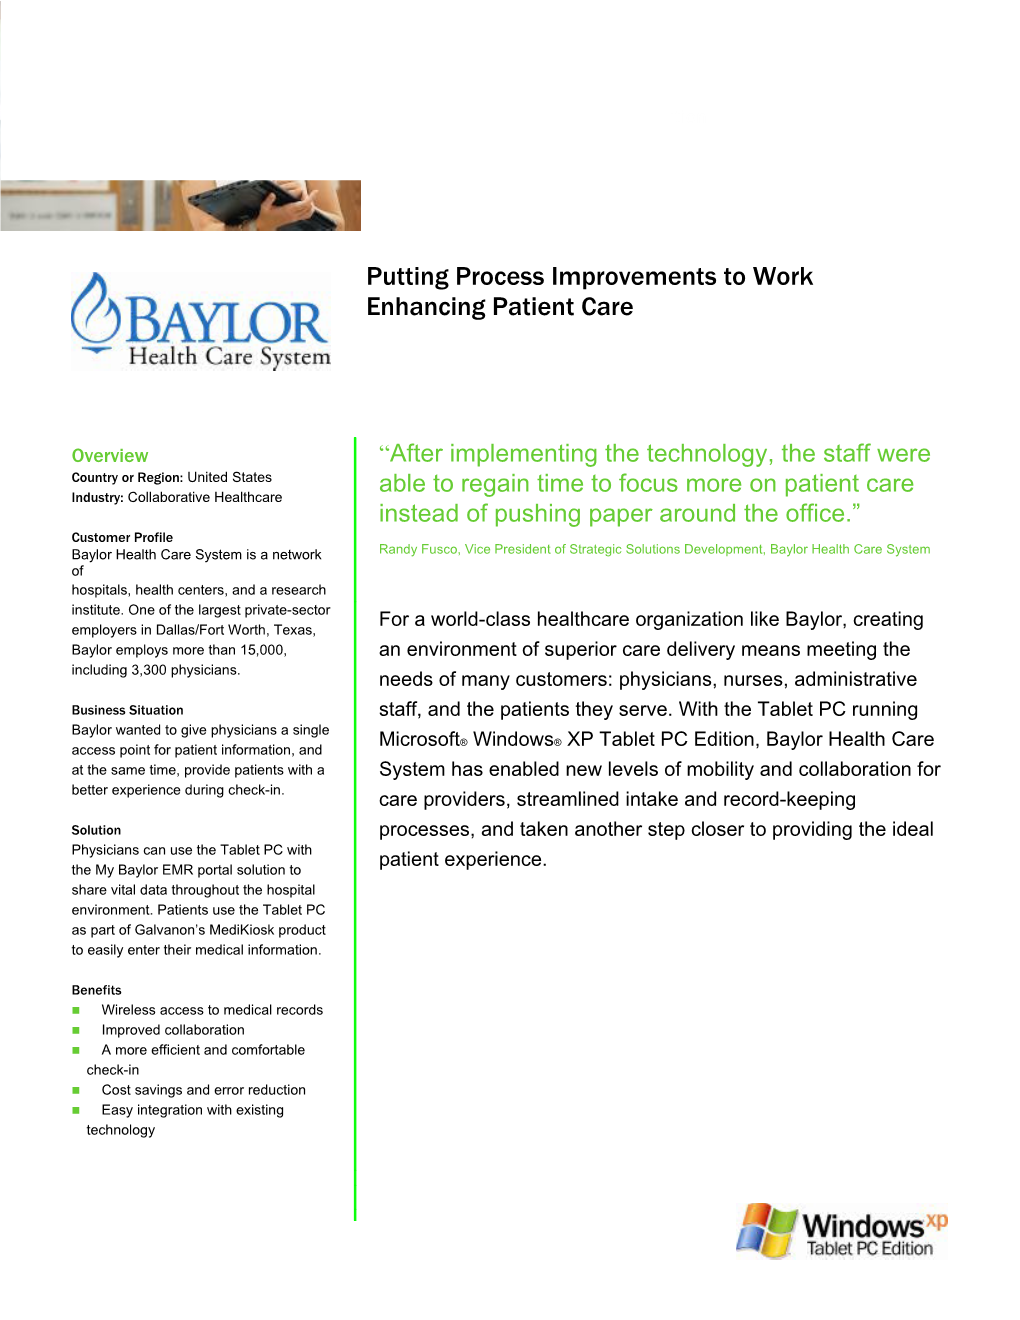 Putting Process Improvements to Work Enhancing Patient Care